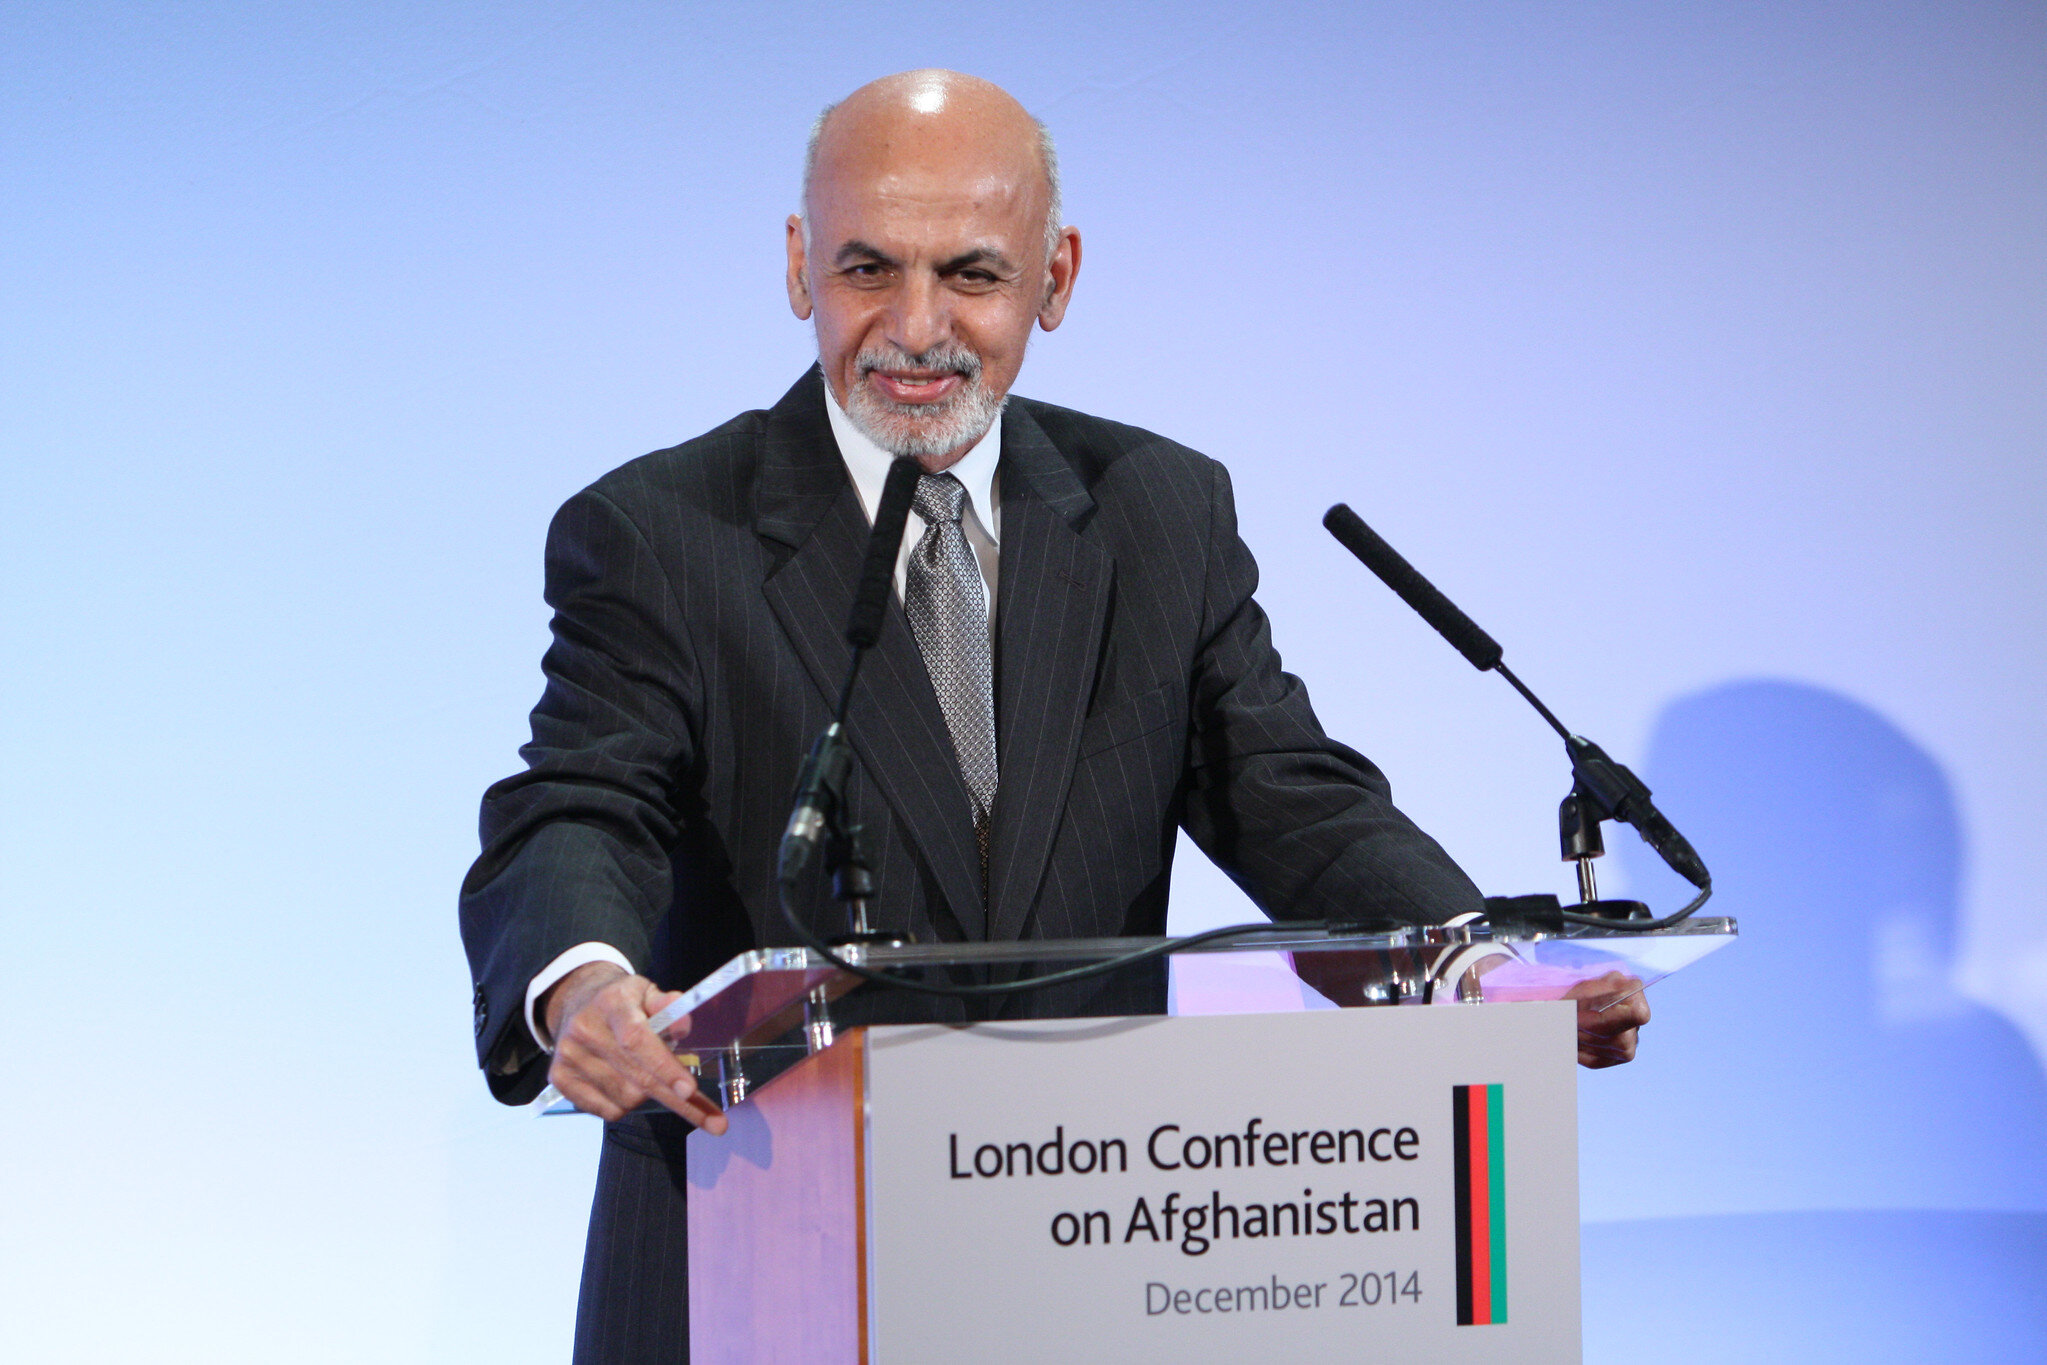 PICTURED: Afghanistan President Ashraf Ghani at the London Conference on Afghanistan on 4 December 2014, co-hosted by the governments of the UK and Afghanistan. Photo credit UK Department for Int. Development. CC 2.0